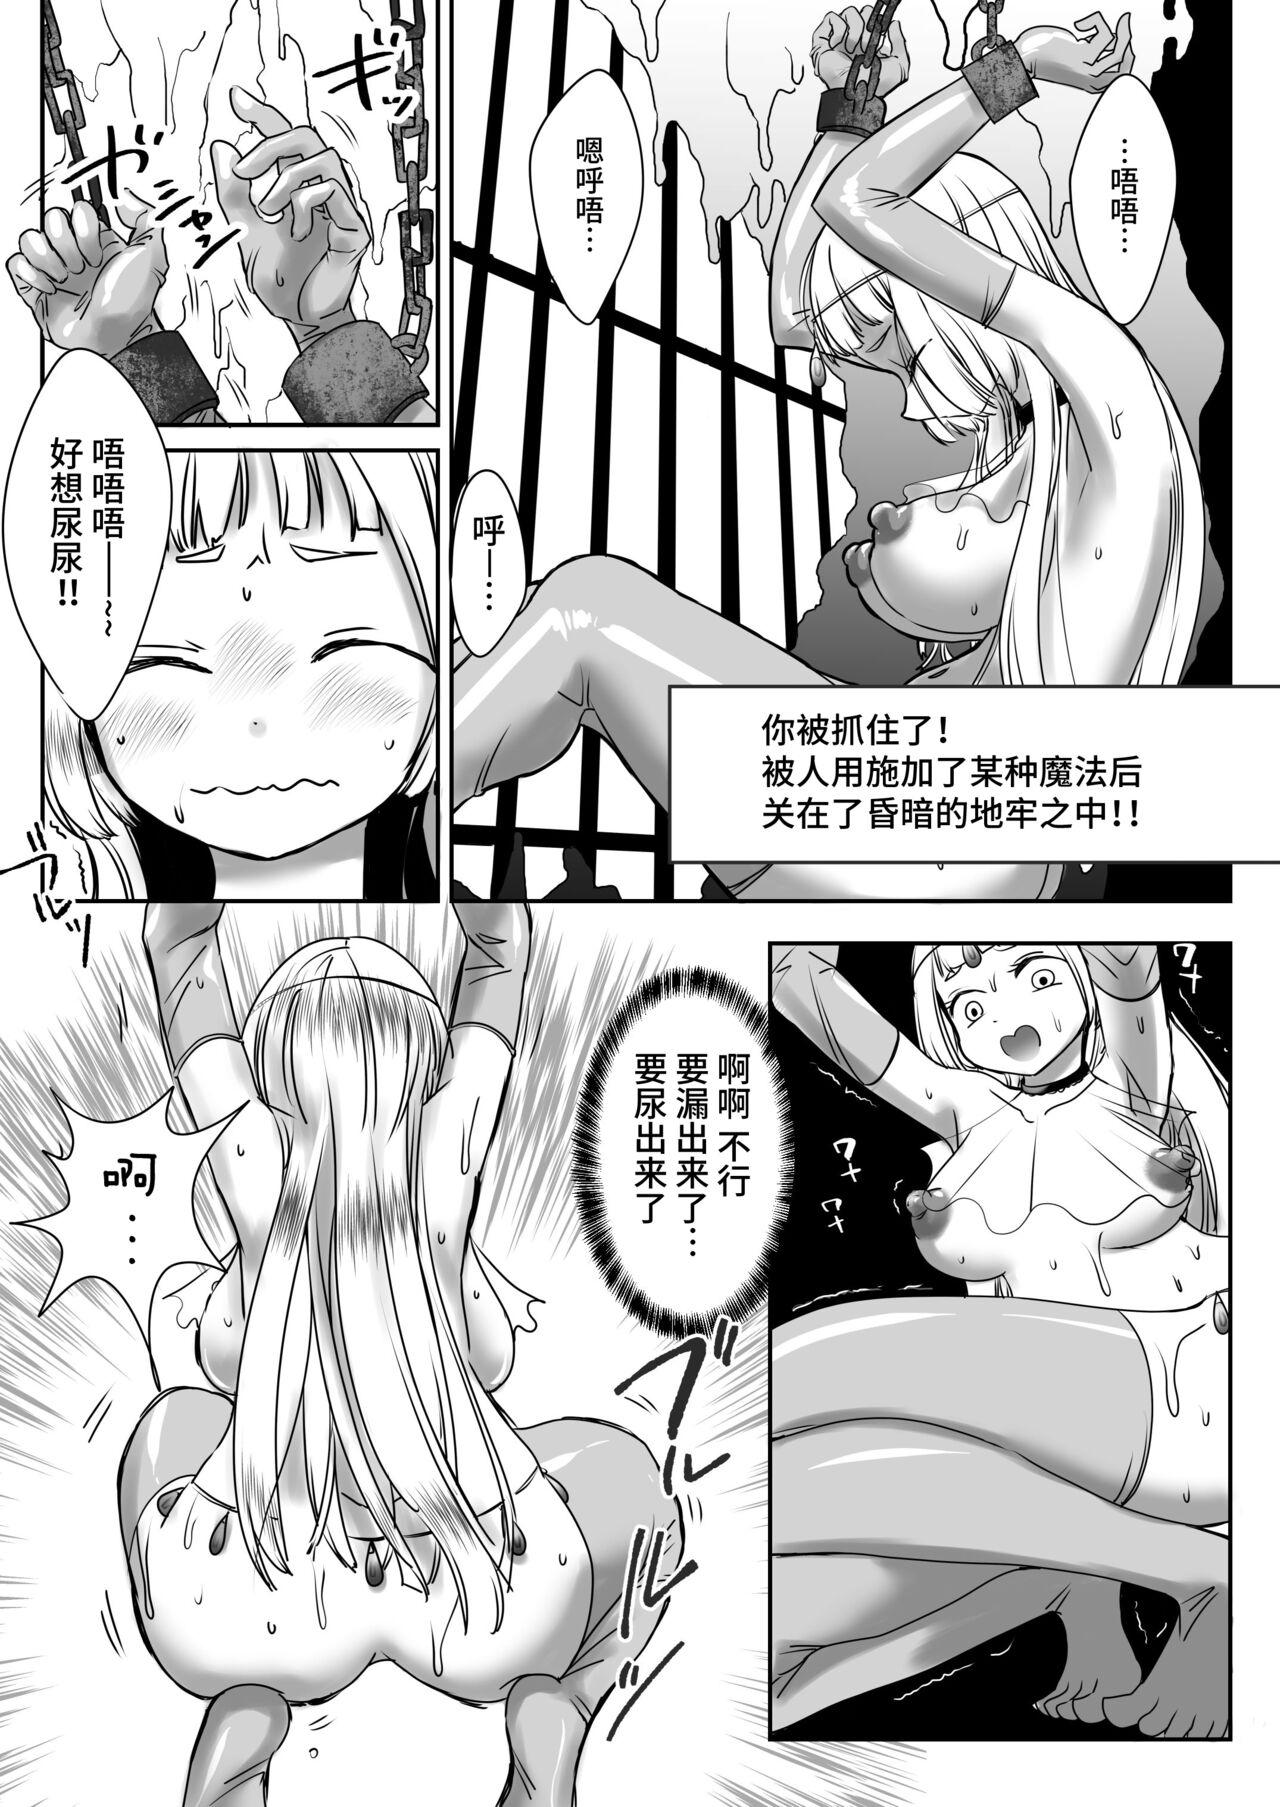 Hairy VR Doujin Eroge Reminiscence Room - Original Gay Fuck - Page 10